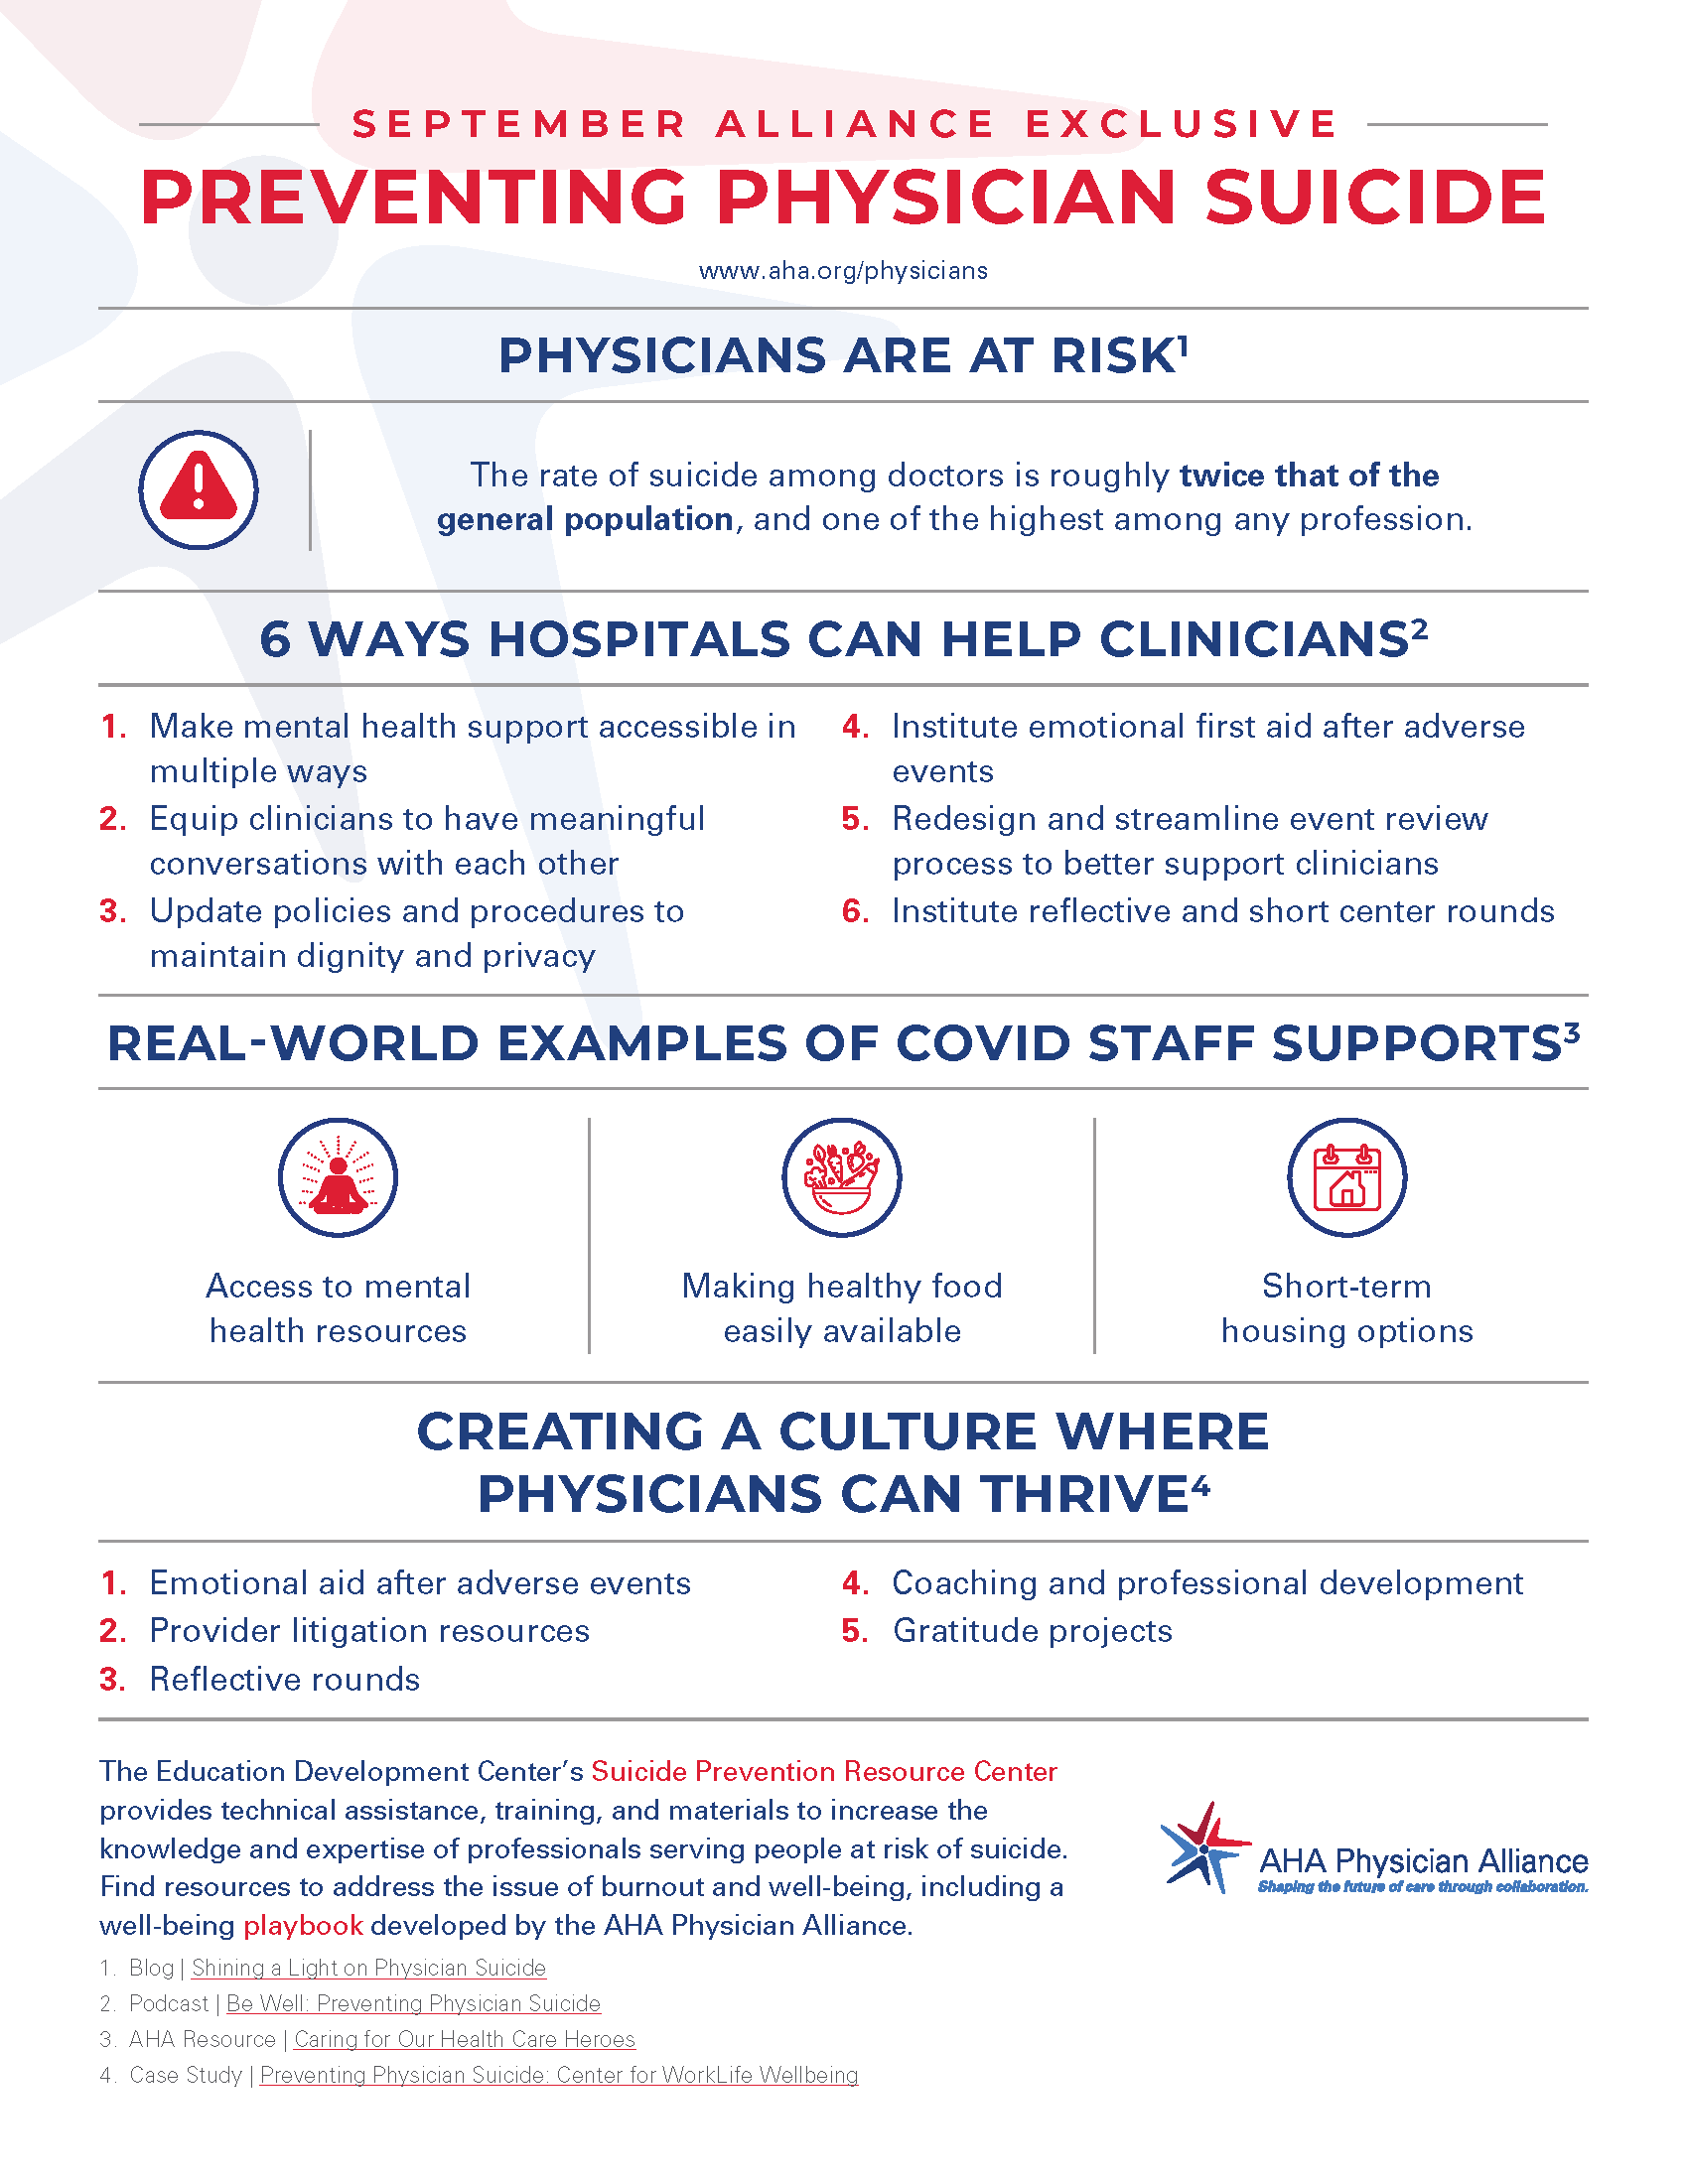 September Alliance Exclusive Preventing Physician Suicide infographic. Physicians are at risk. The rate of suicide among doctors is roughly twice that of the general population, and one of the highest among any profession.